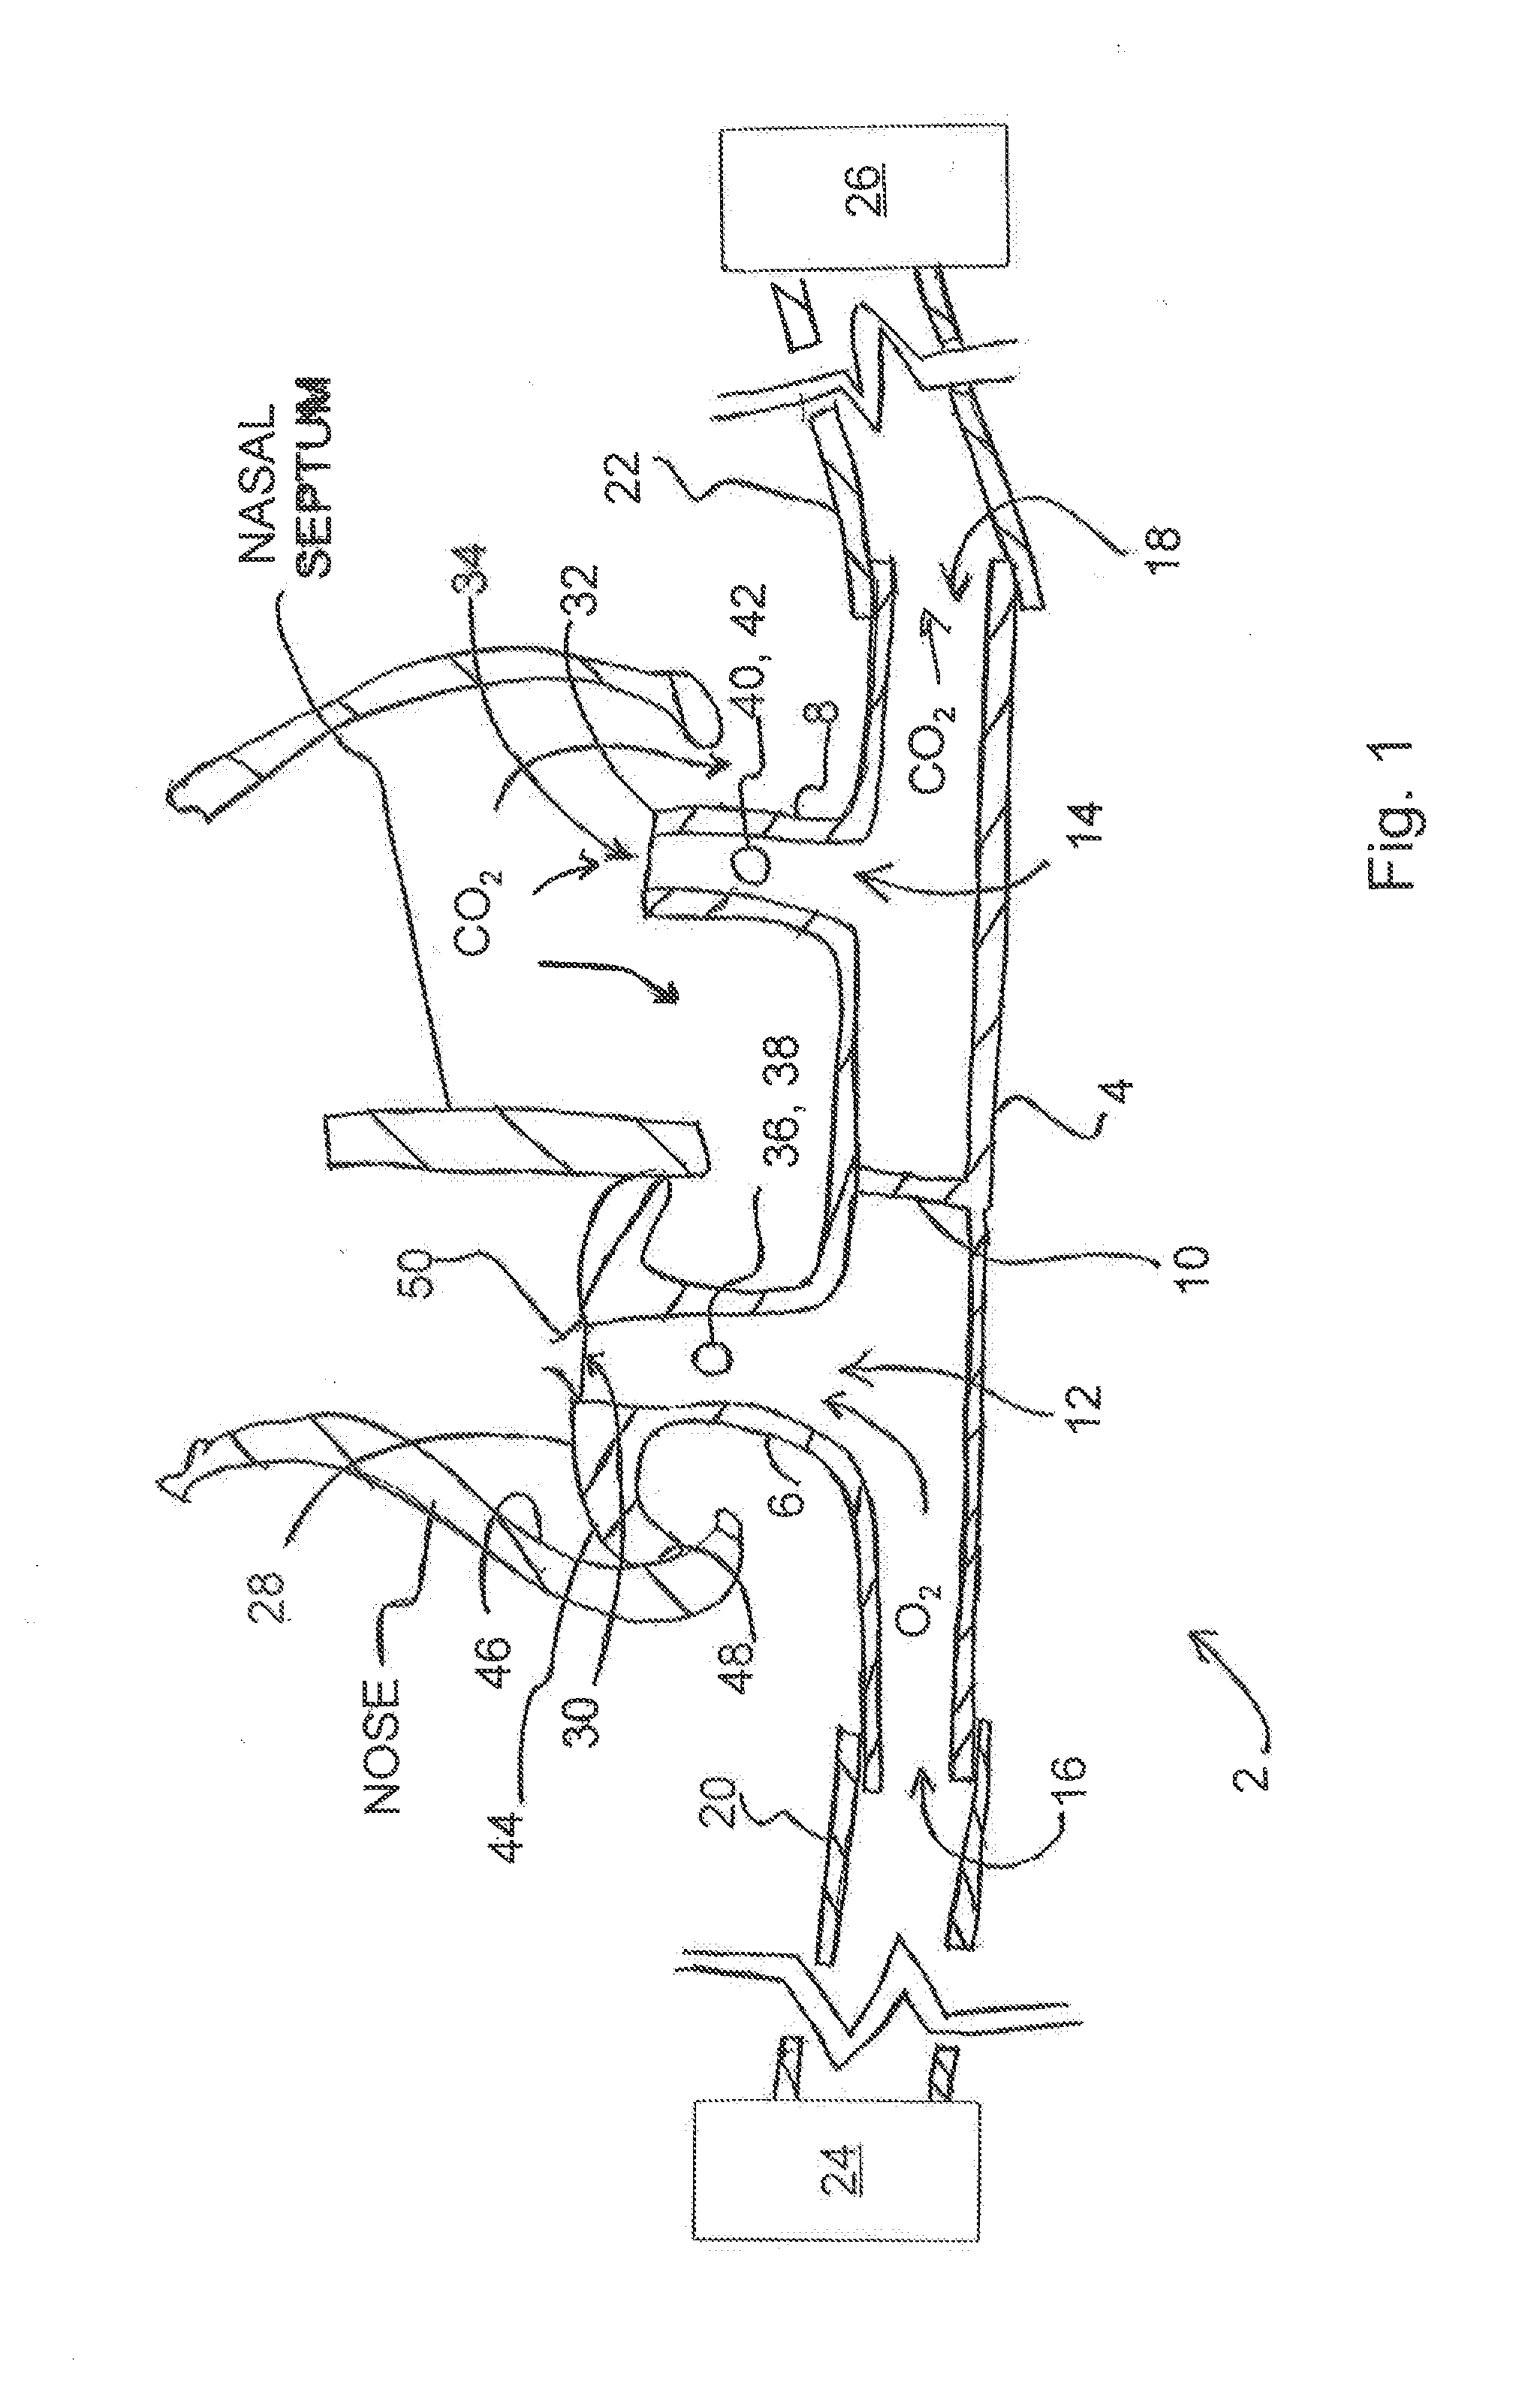 Method and system with divided cannula having low oxygen flow rate and improved end-tidal co2 measurement